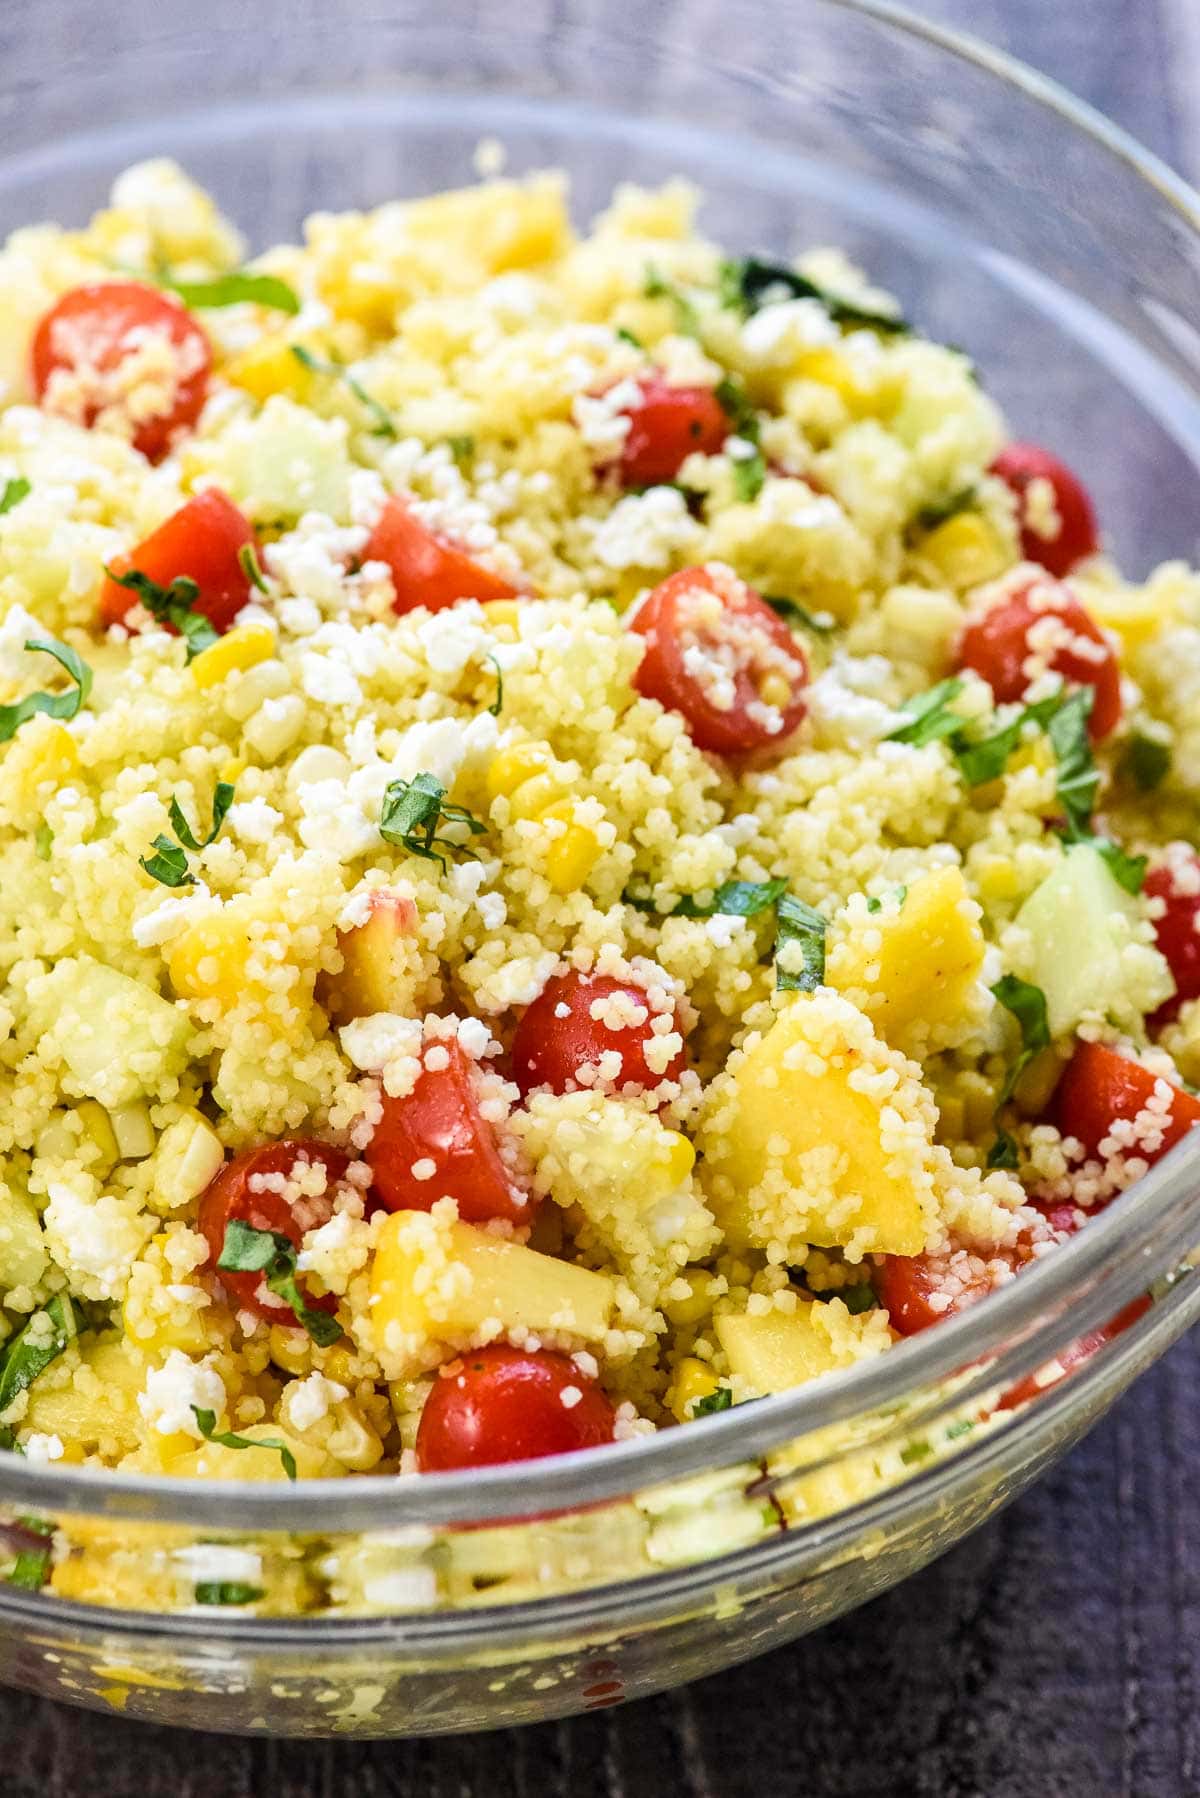 Couscous Salad in glass bowl with basil garnish.